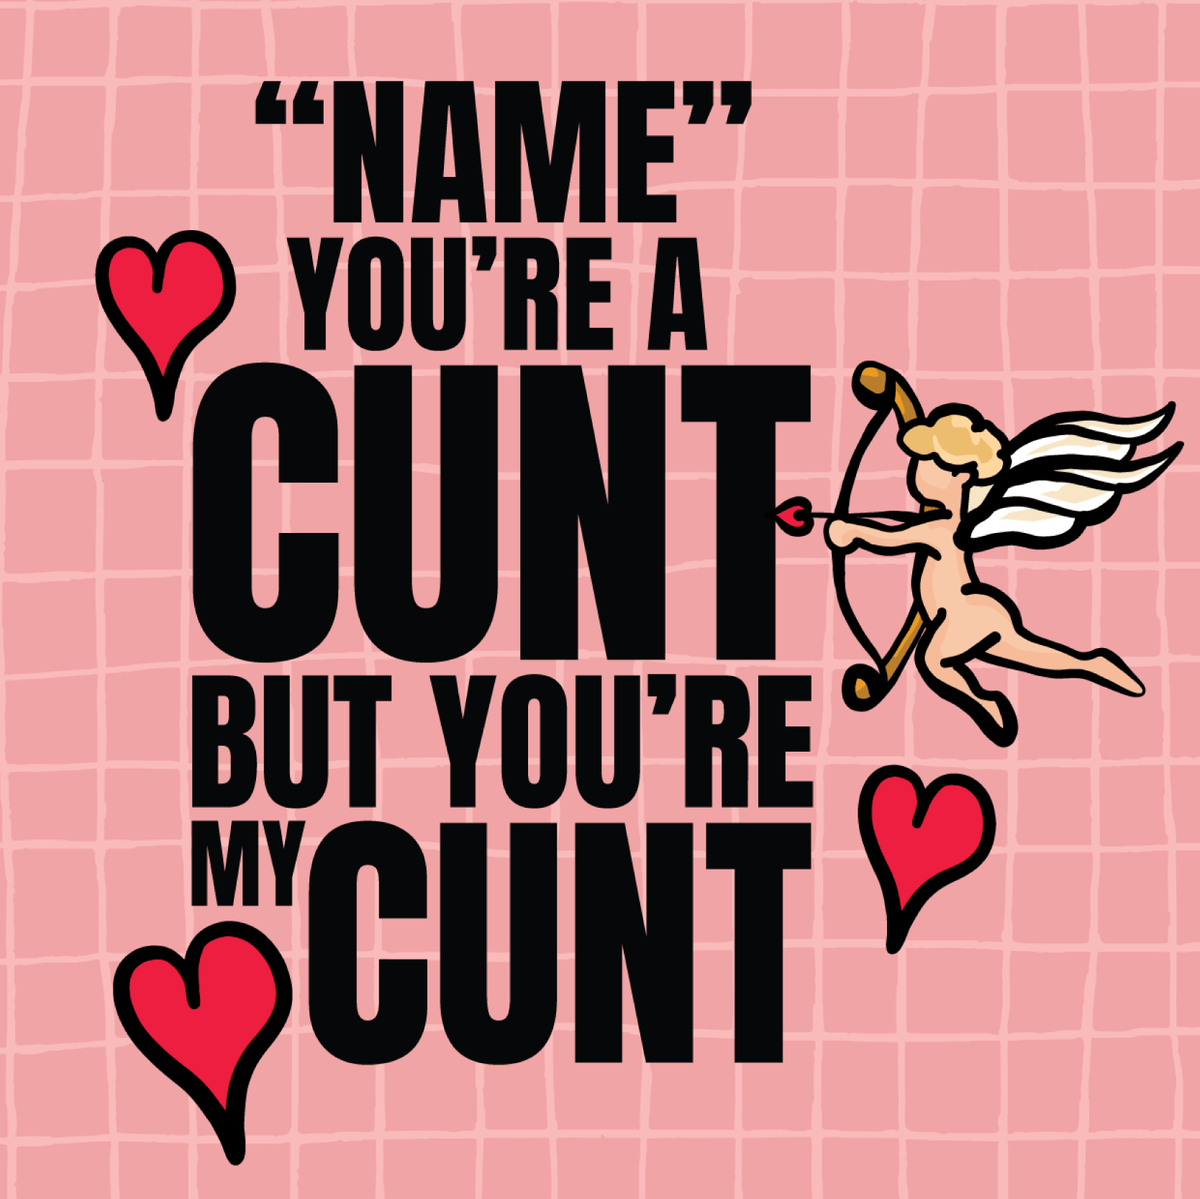 But you're mine 🥰 - Personalised Stubby Holder